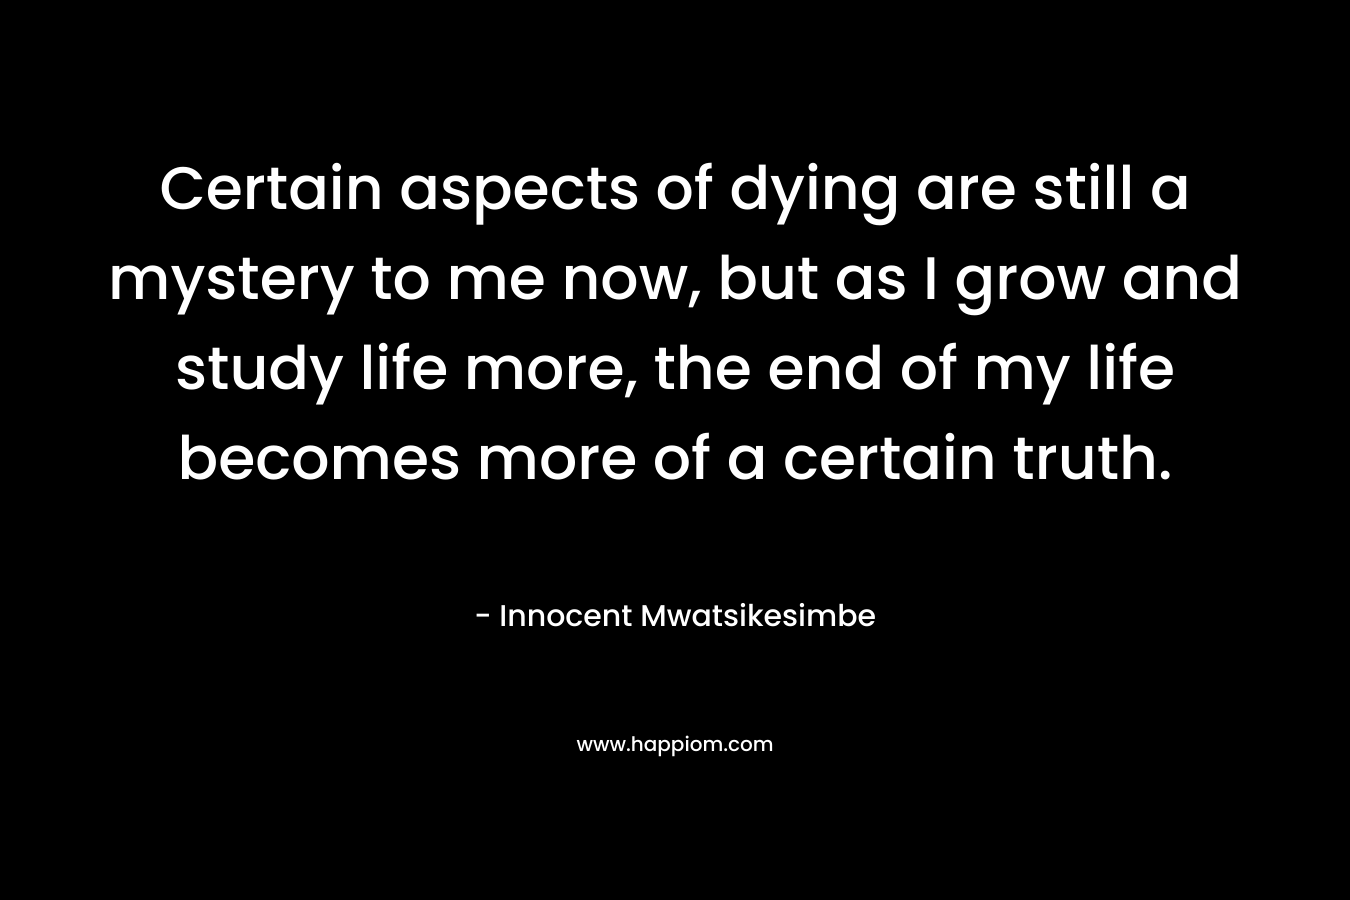 Certain aspects of dying are still a mystery to me now, but as I grow and study life more, the end of my life becomes more of a certain truth.